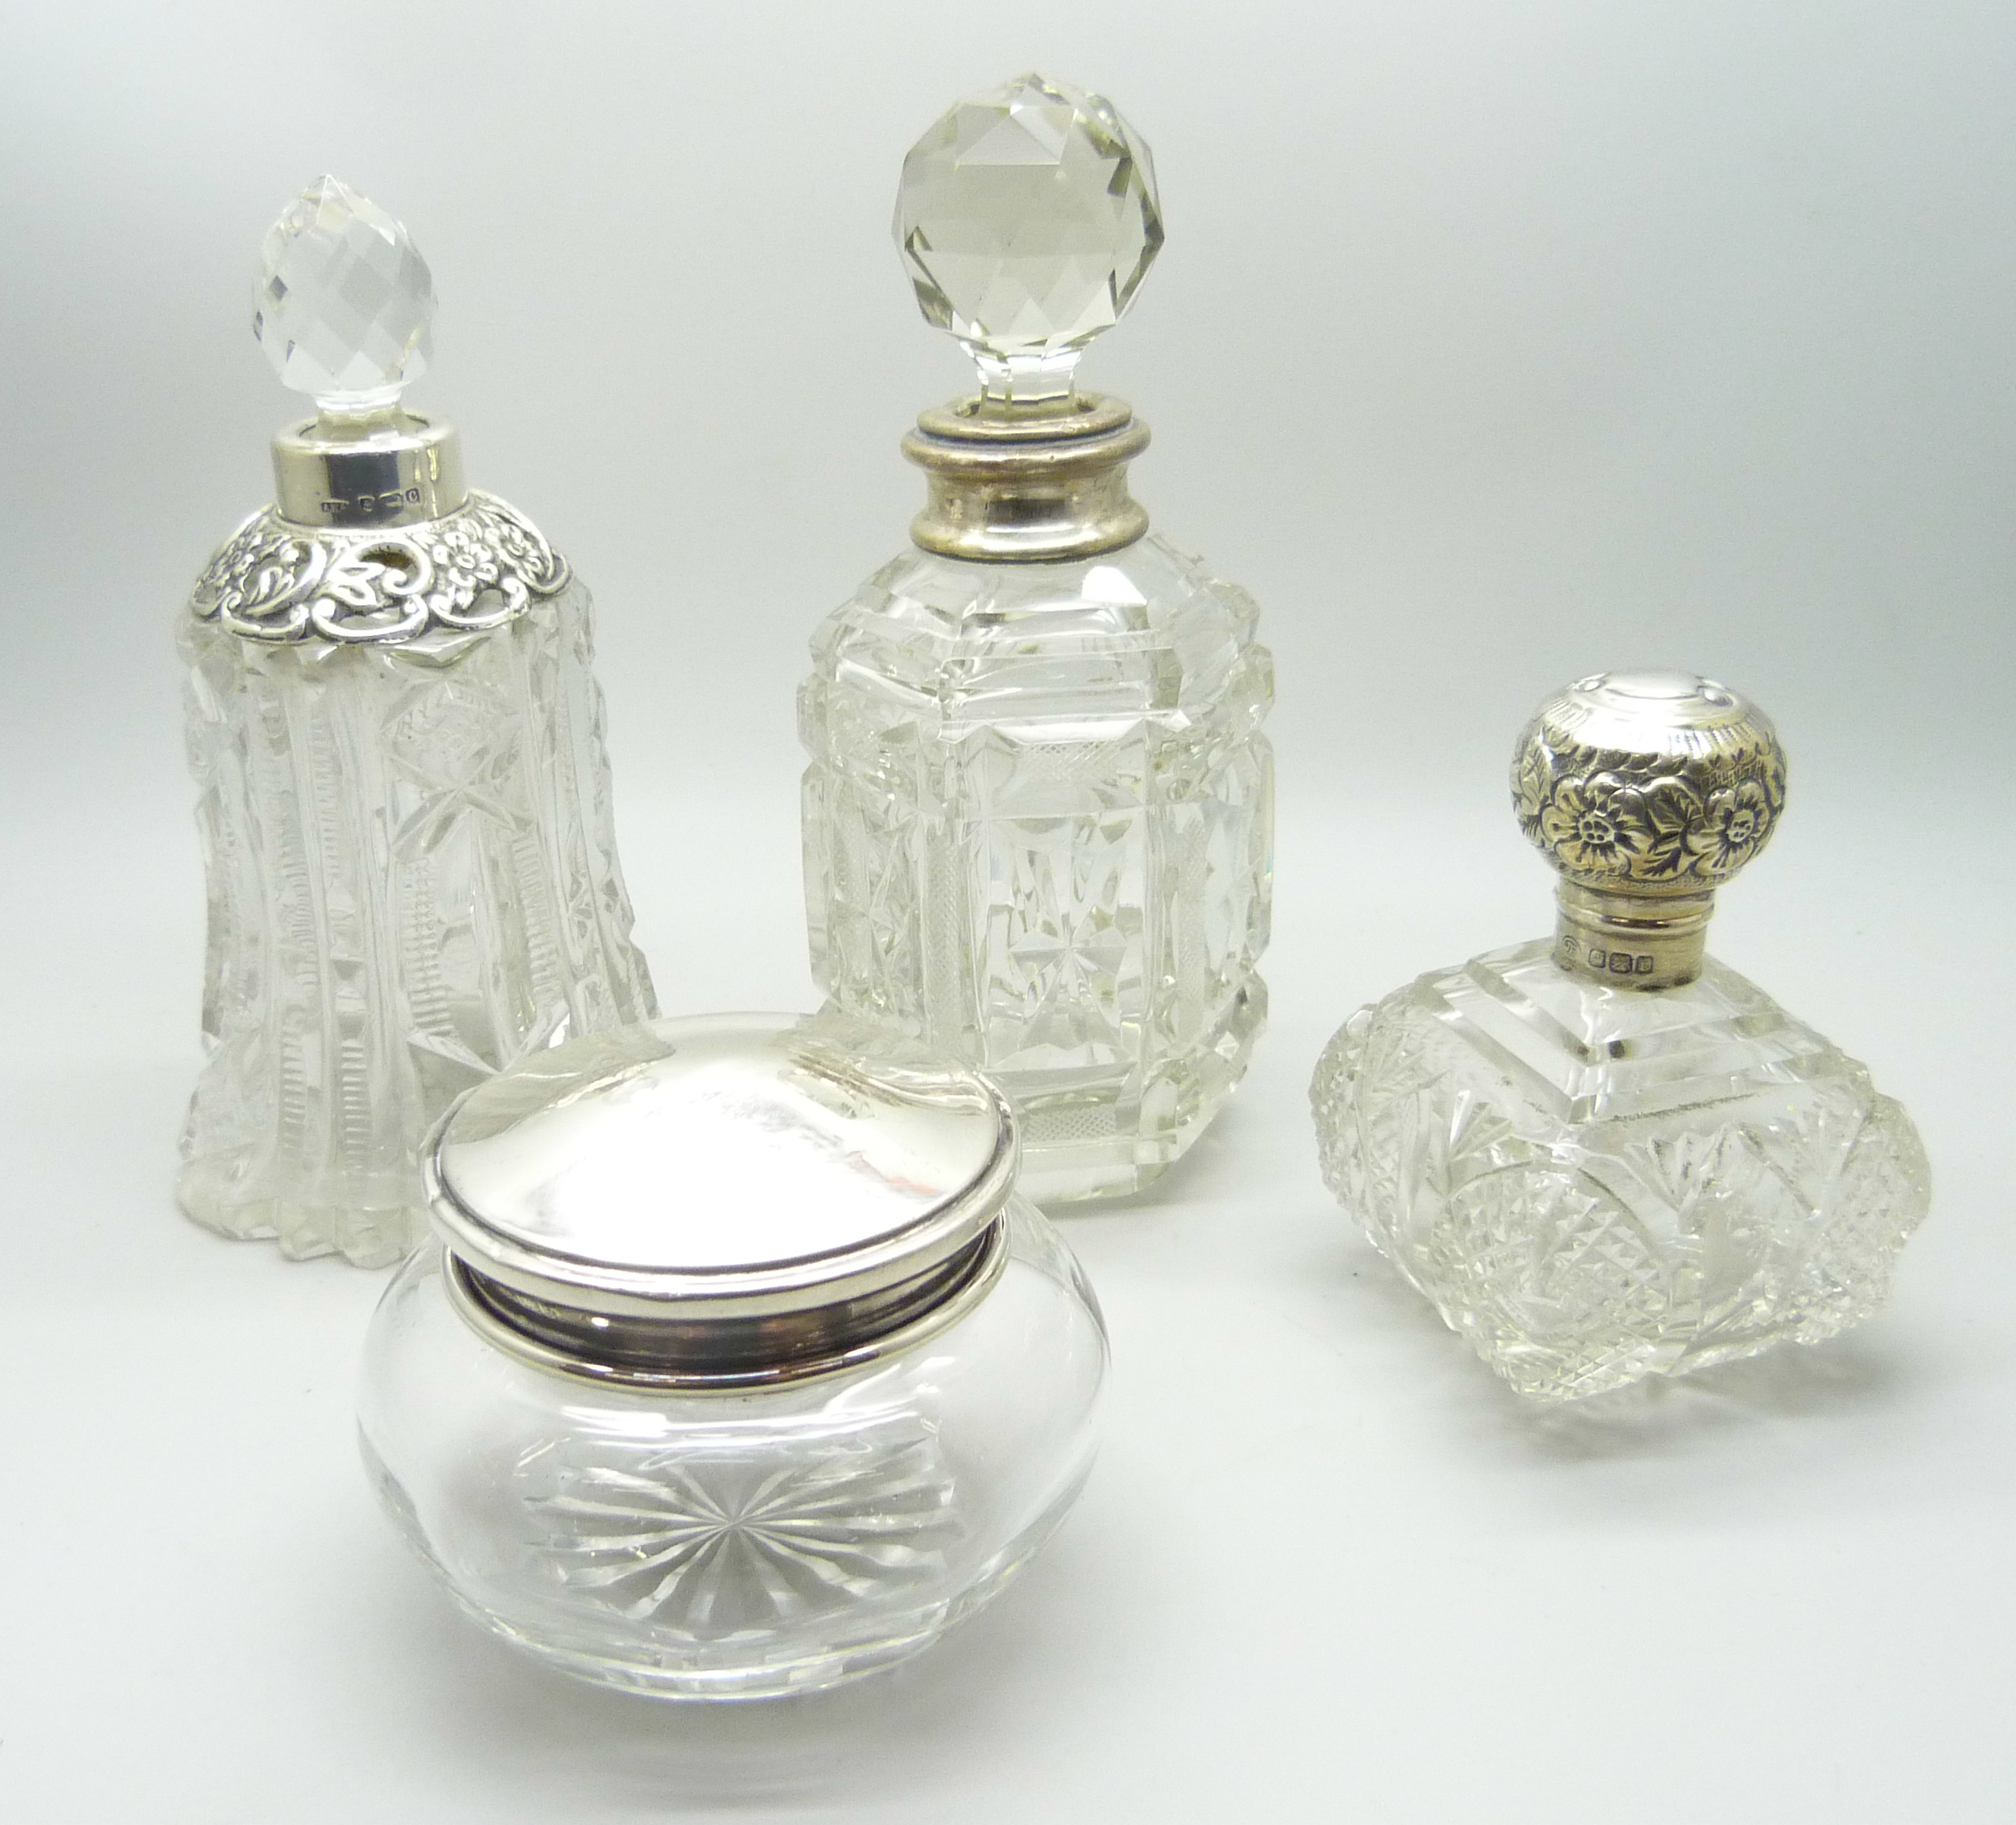 A silver mounted cut glass scent bottle in the shape of a bell, Birmingham 1902, two other silver